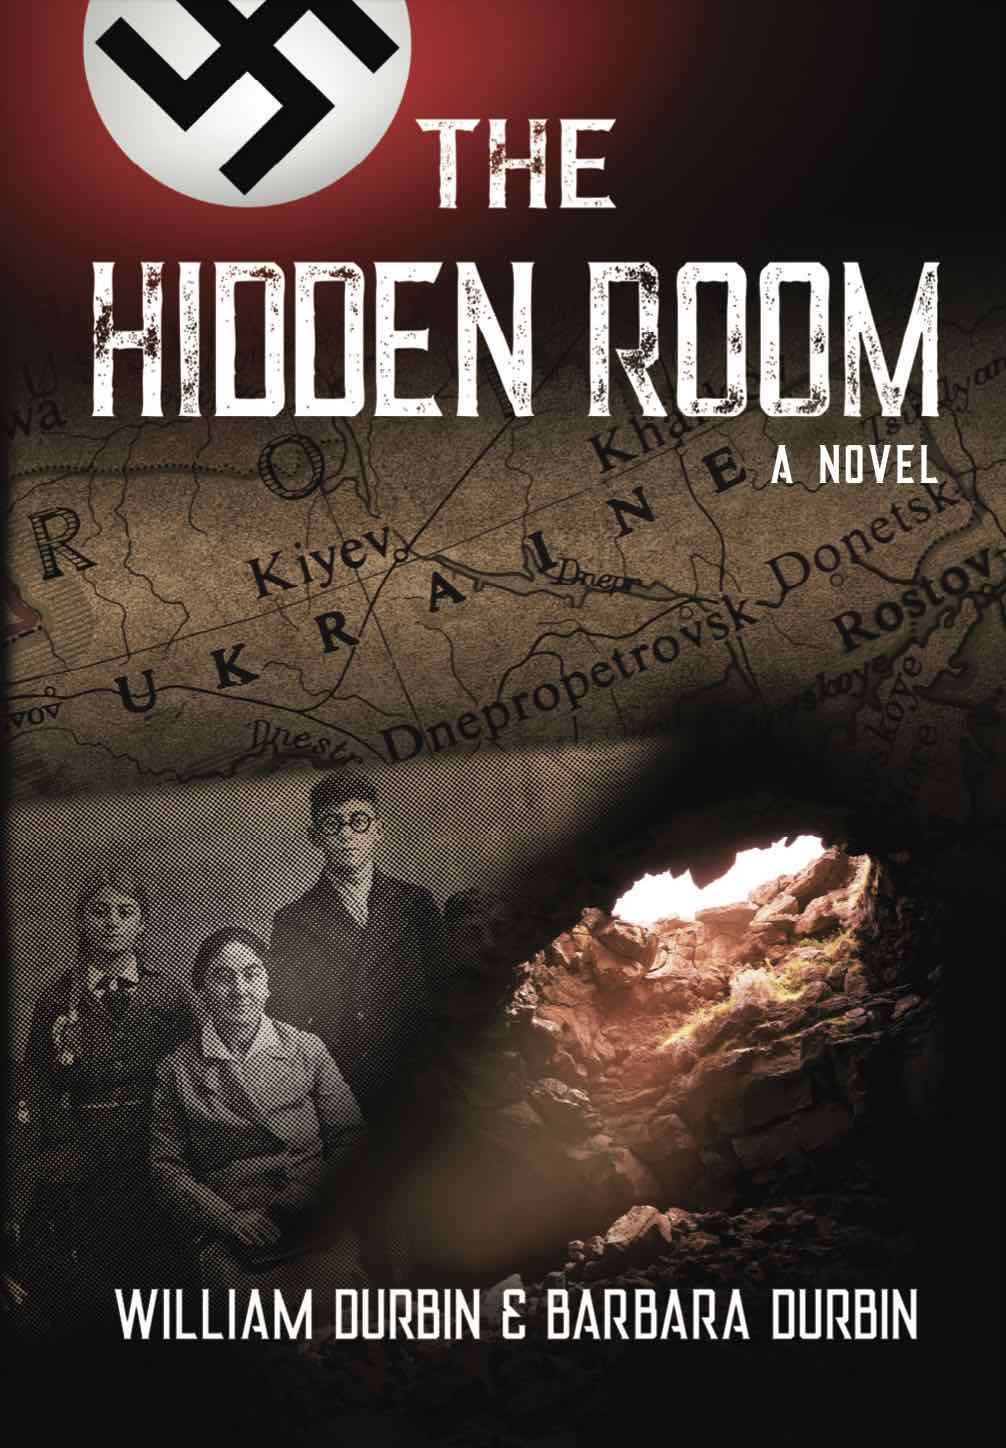 The Hidden Room book cover